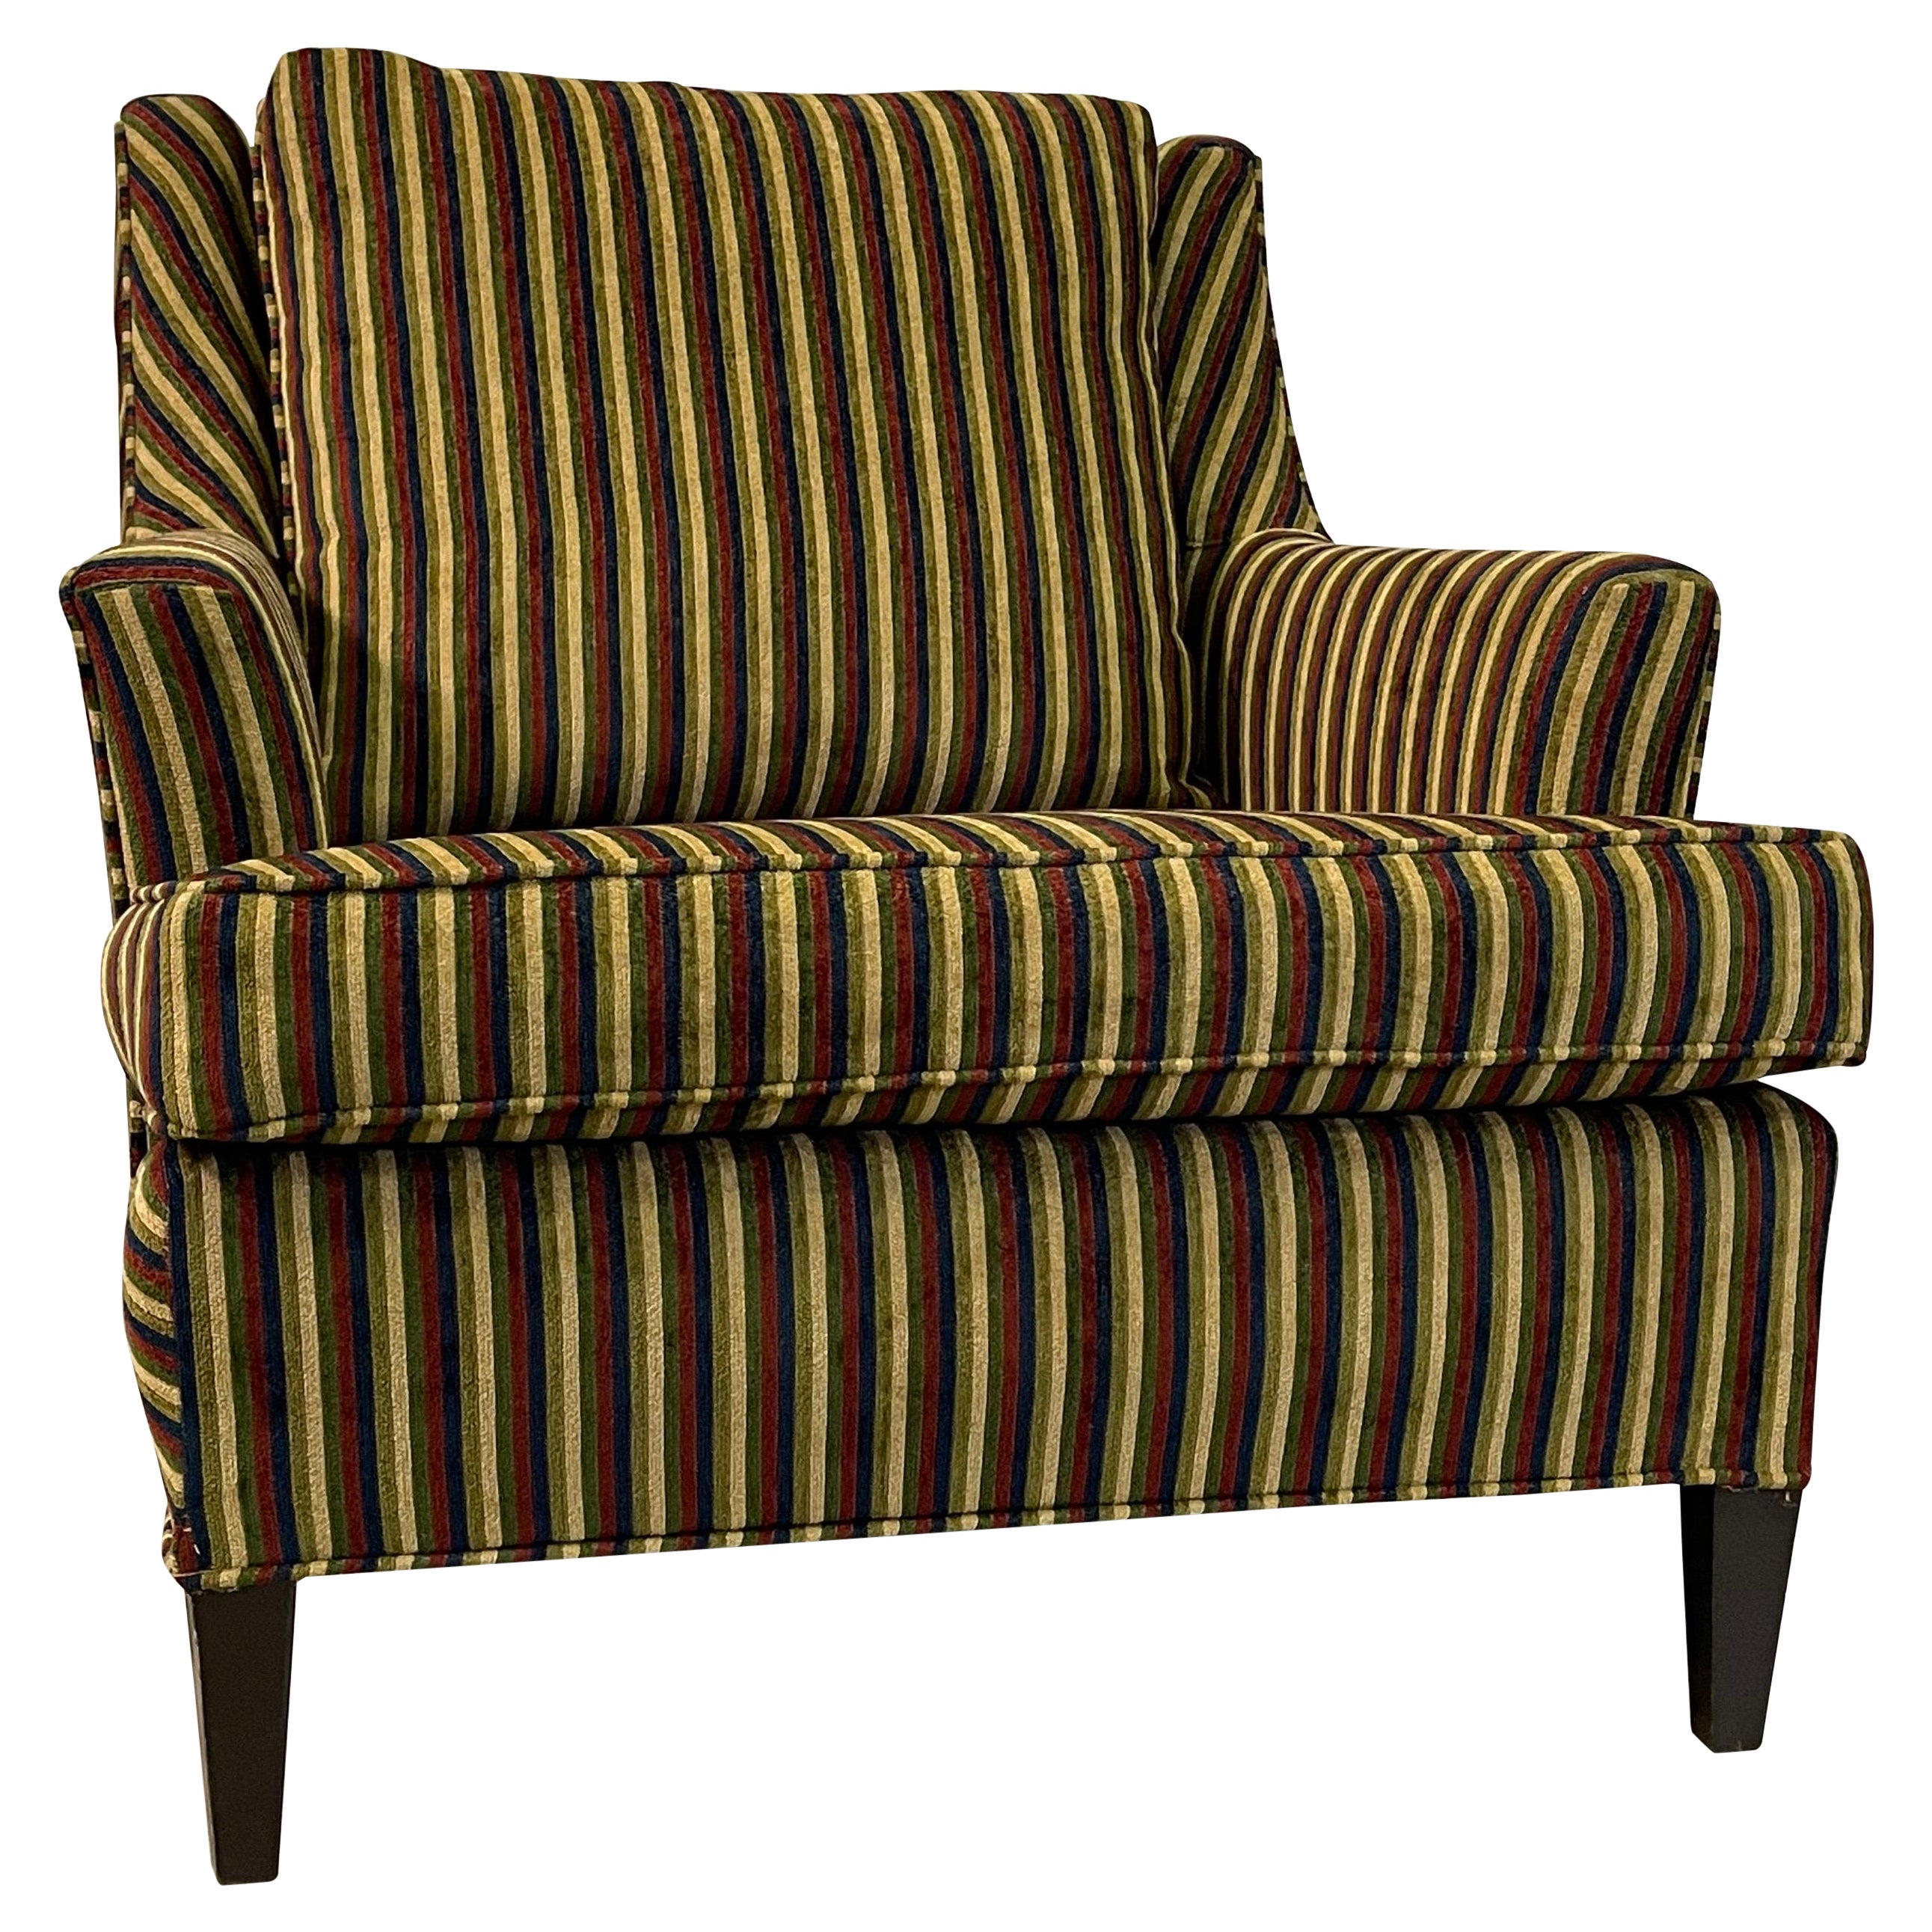 1960s Lounge Chair with Striped Fabric